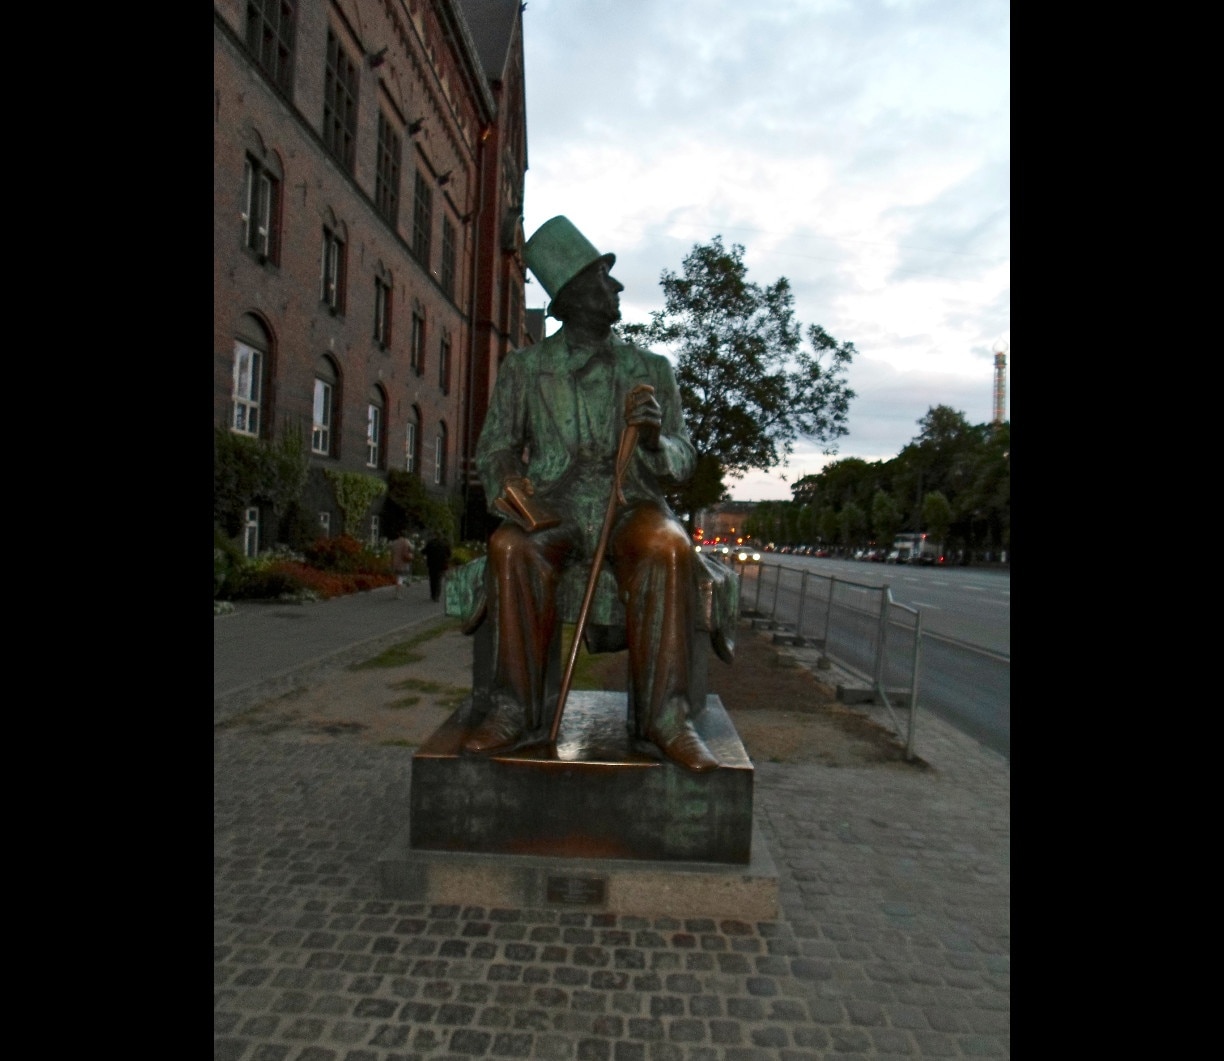 The statue of the great Danish storyteller who gave us the "Little Mermaid" and "The emperor's new clothes"